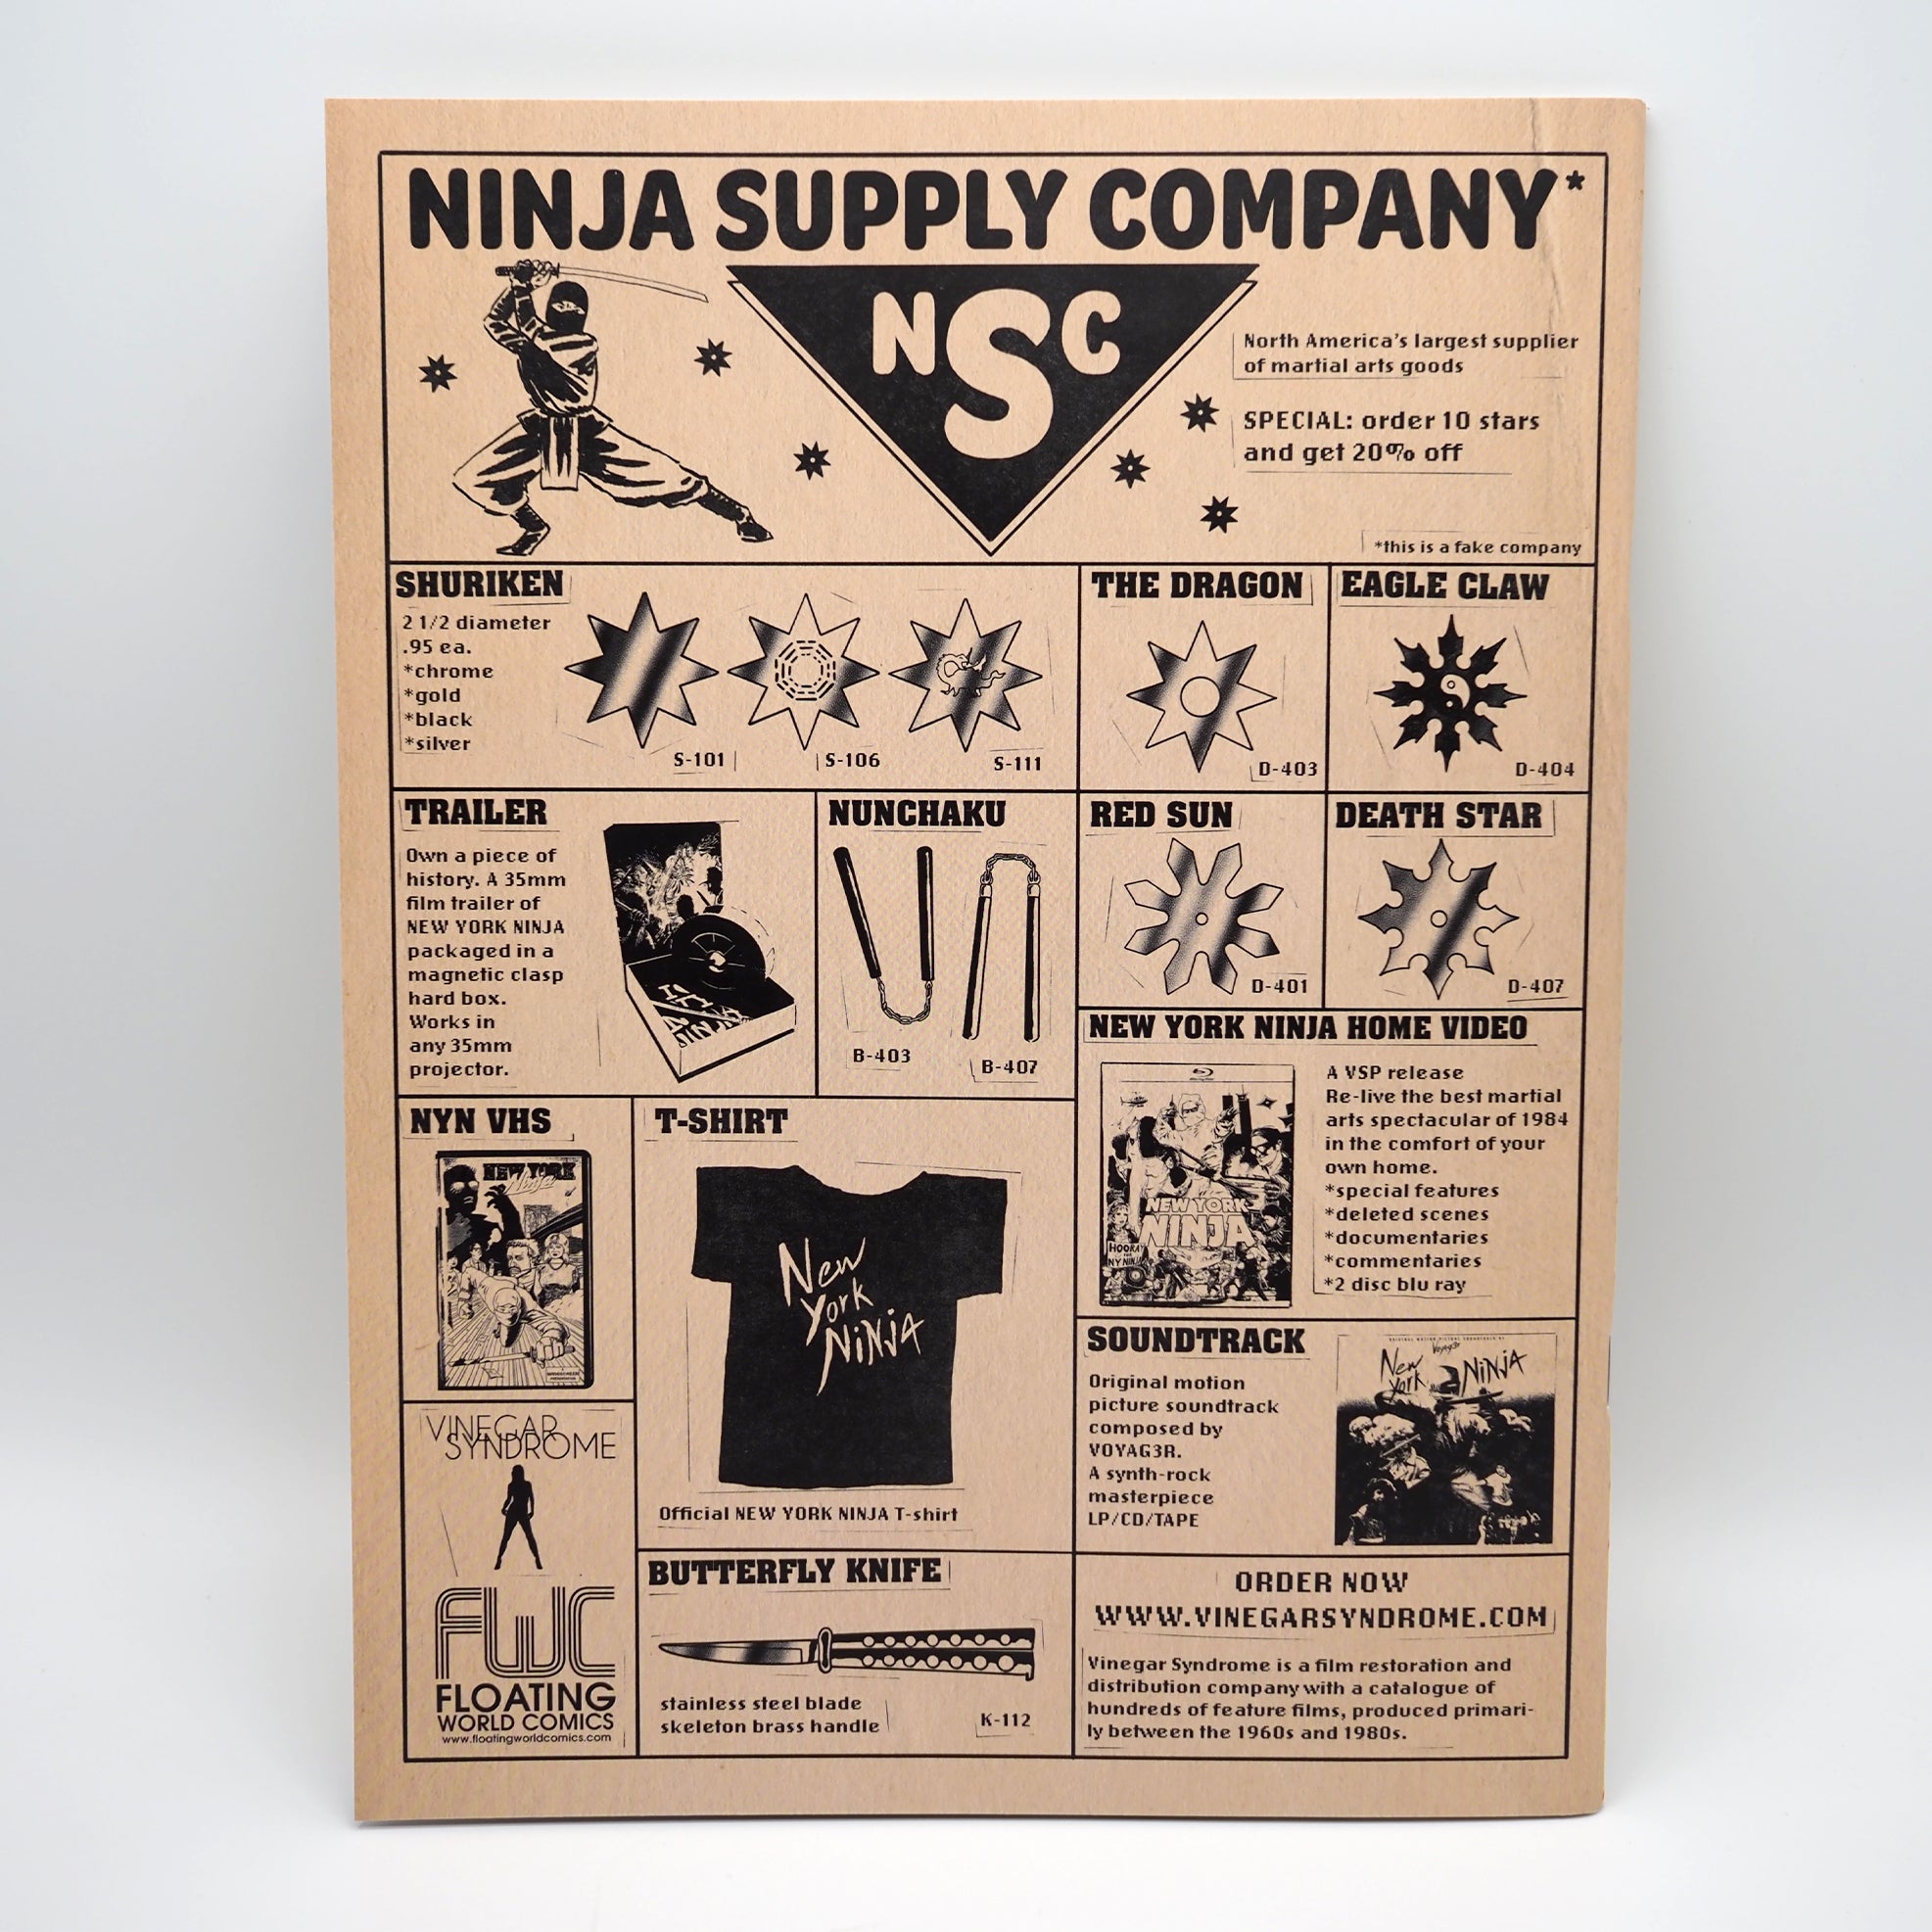 NEW YORK NINJA SUPER SPECIAL by Charles Forsman – Floating World Comics